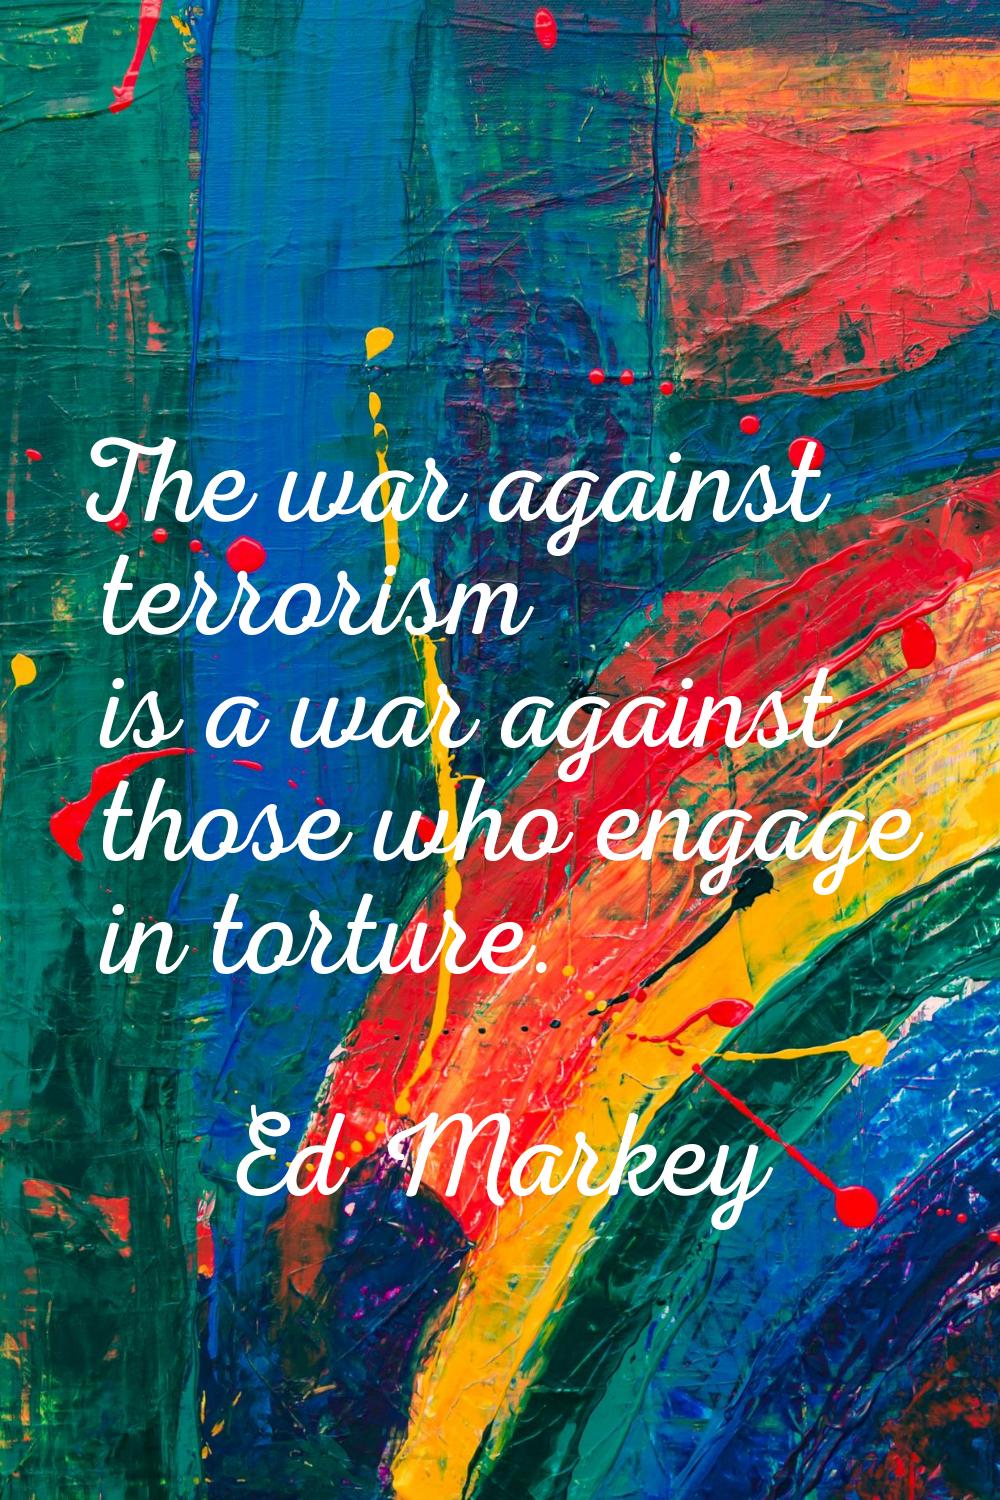 The war against terrorism is a war against those who engage in torture.